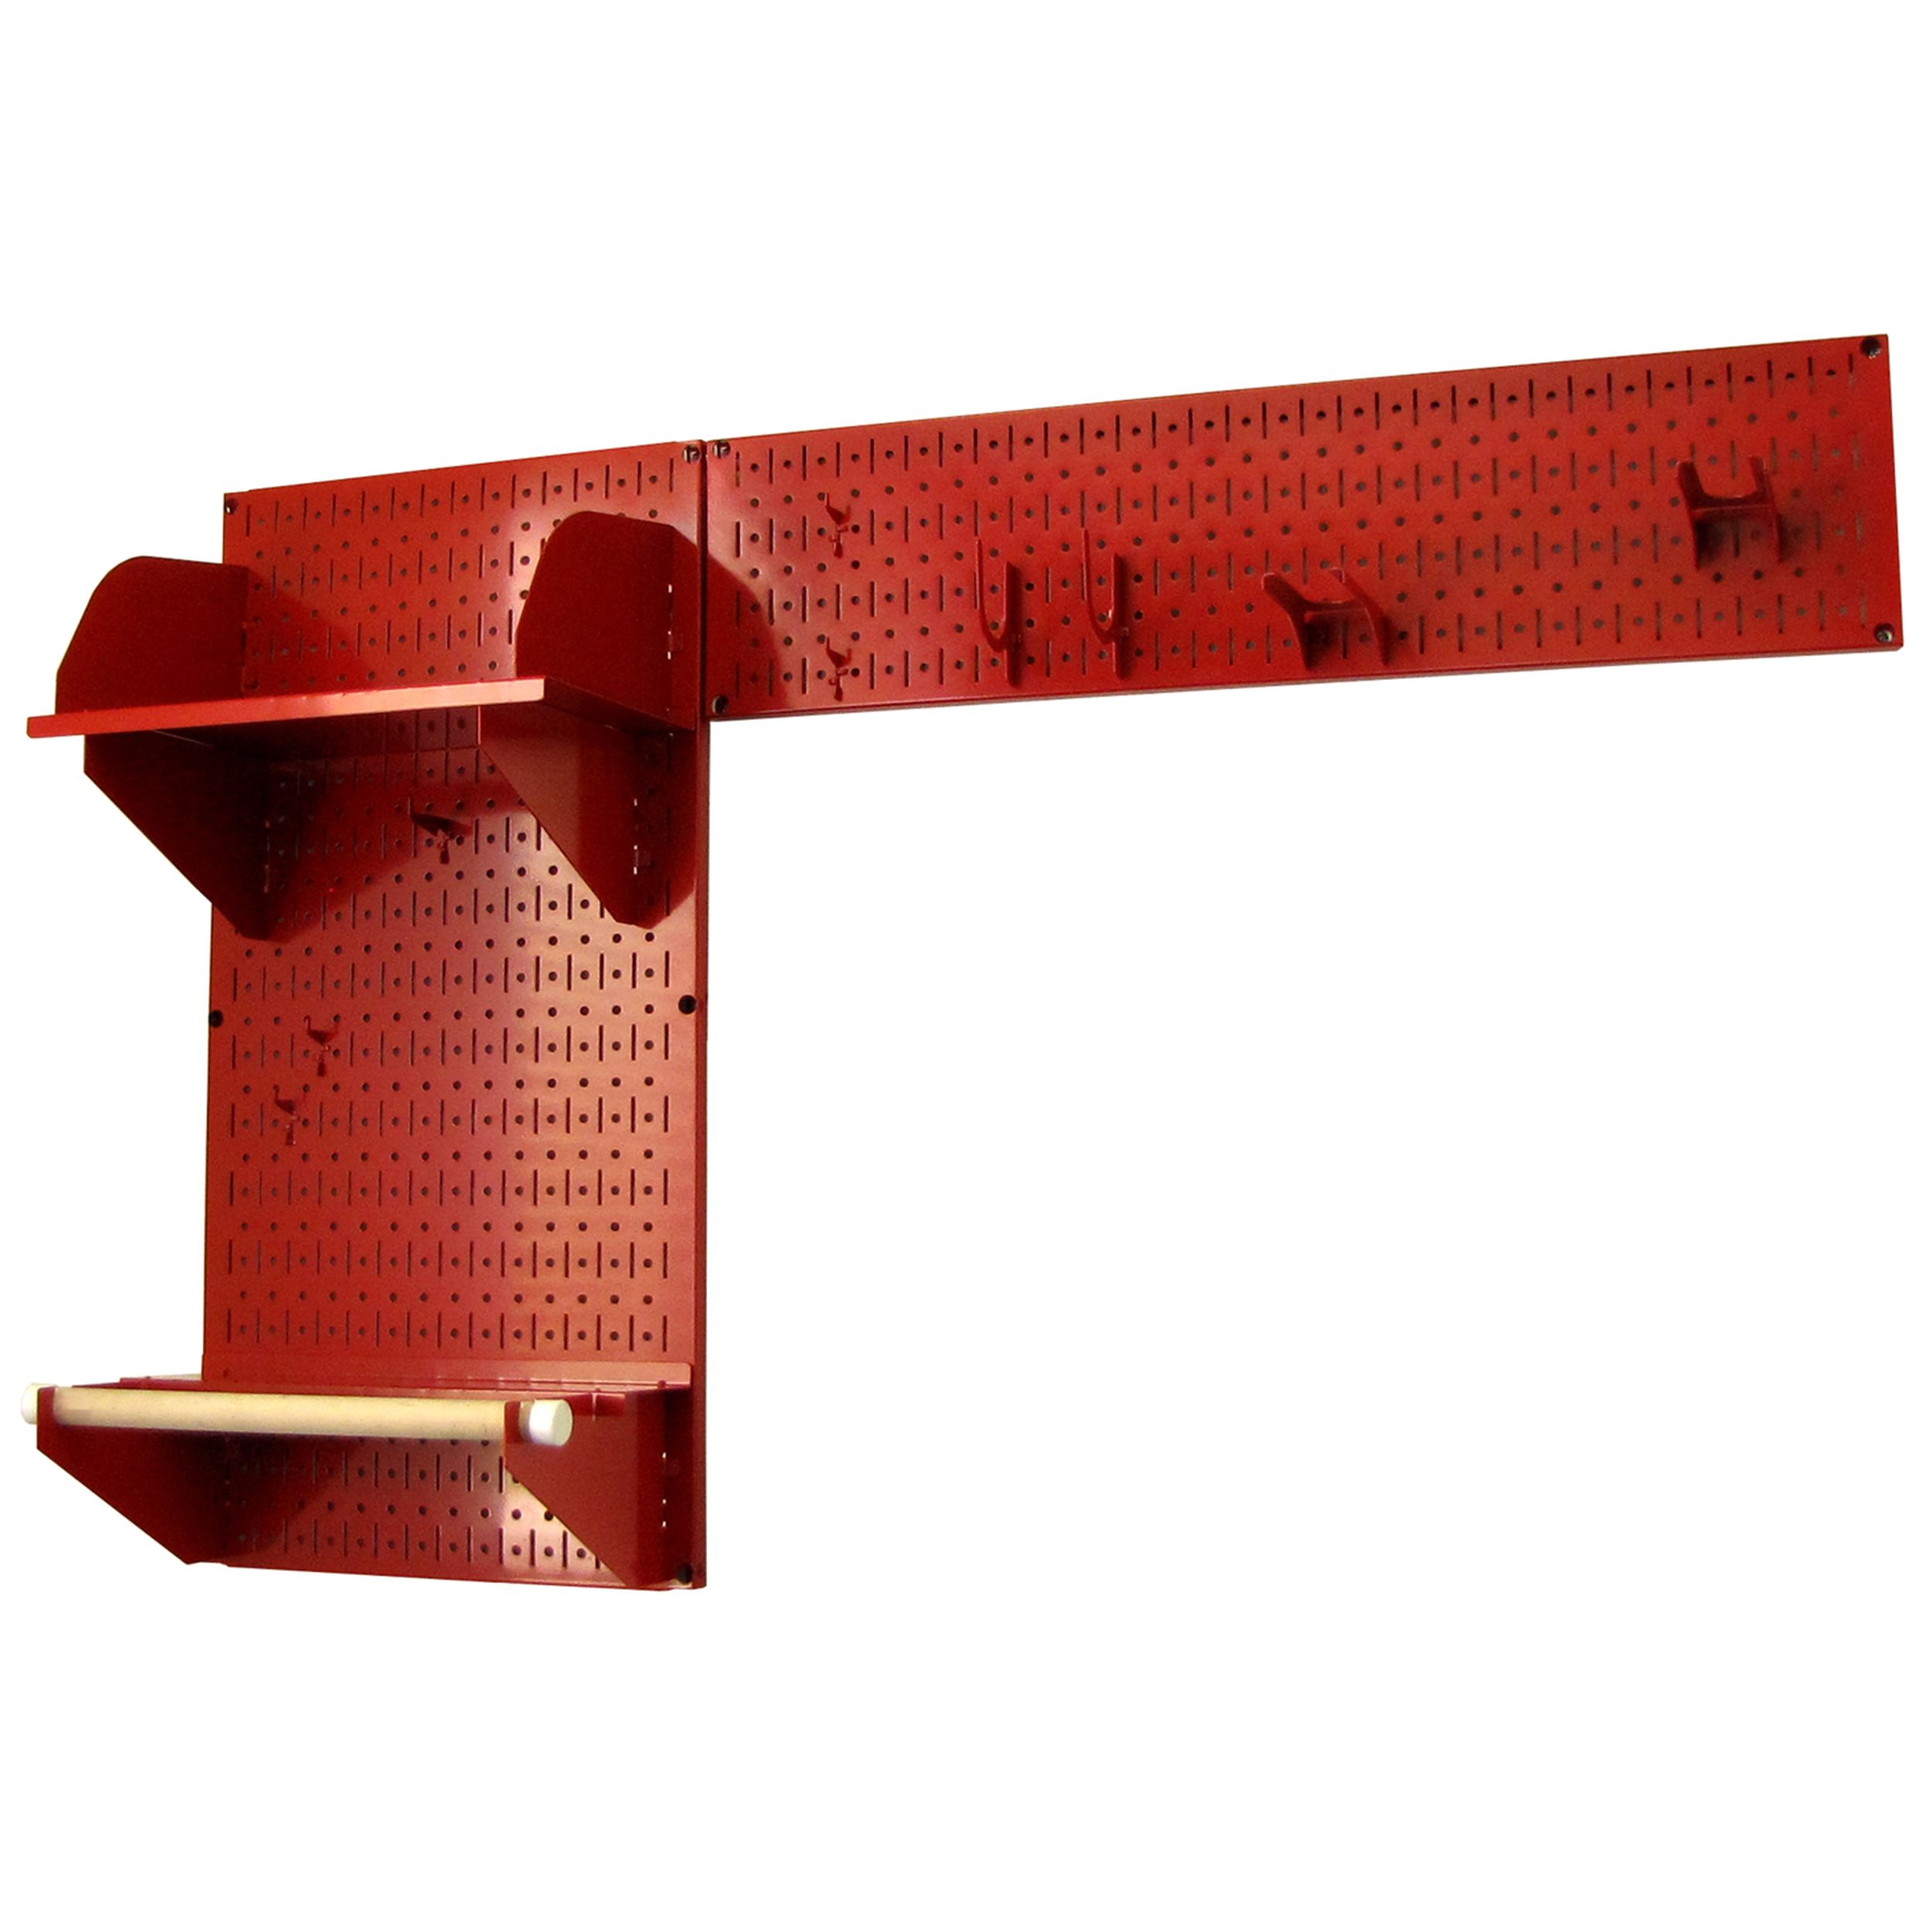 Pegboard Garden Tool Board Organizer With Red Pegboard And Red Accessories